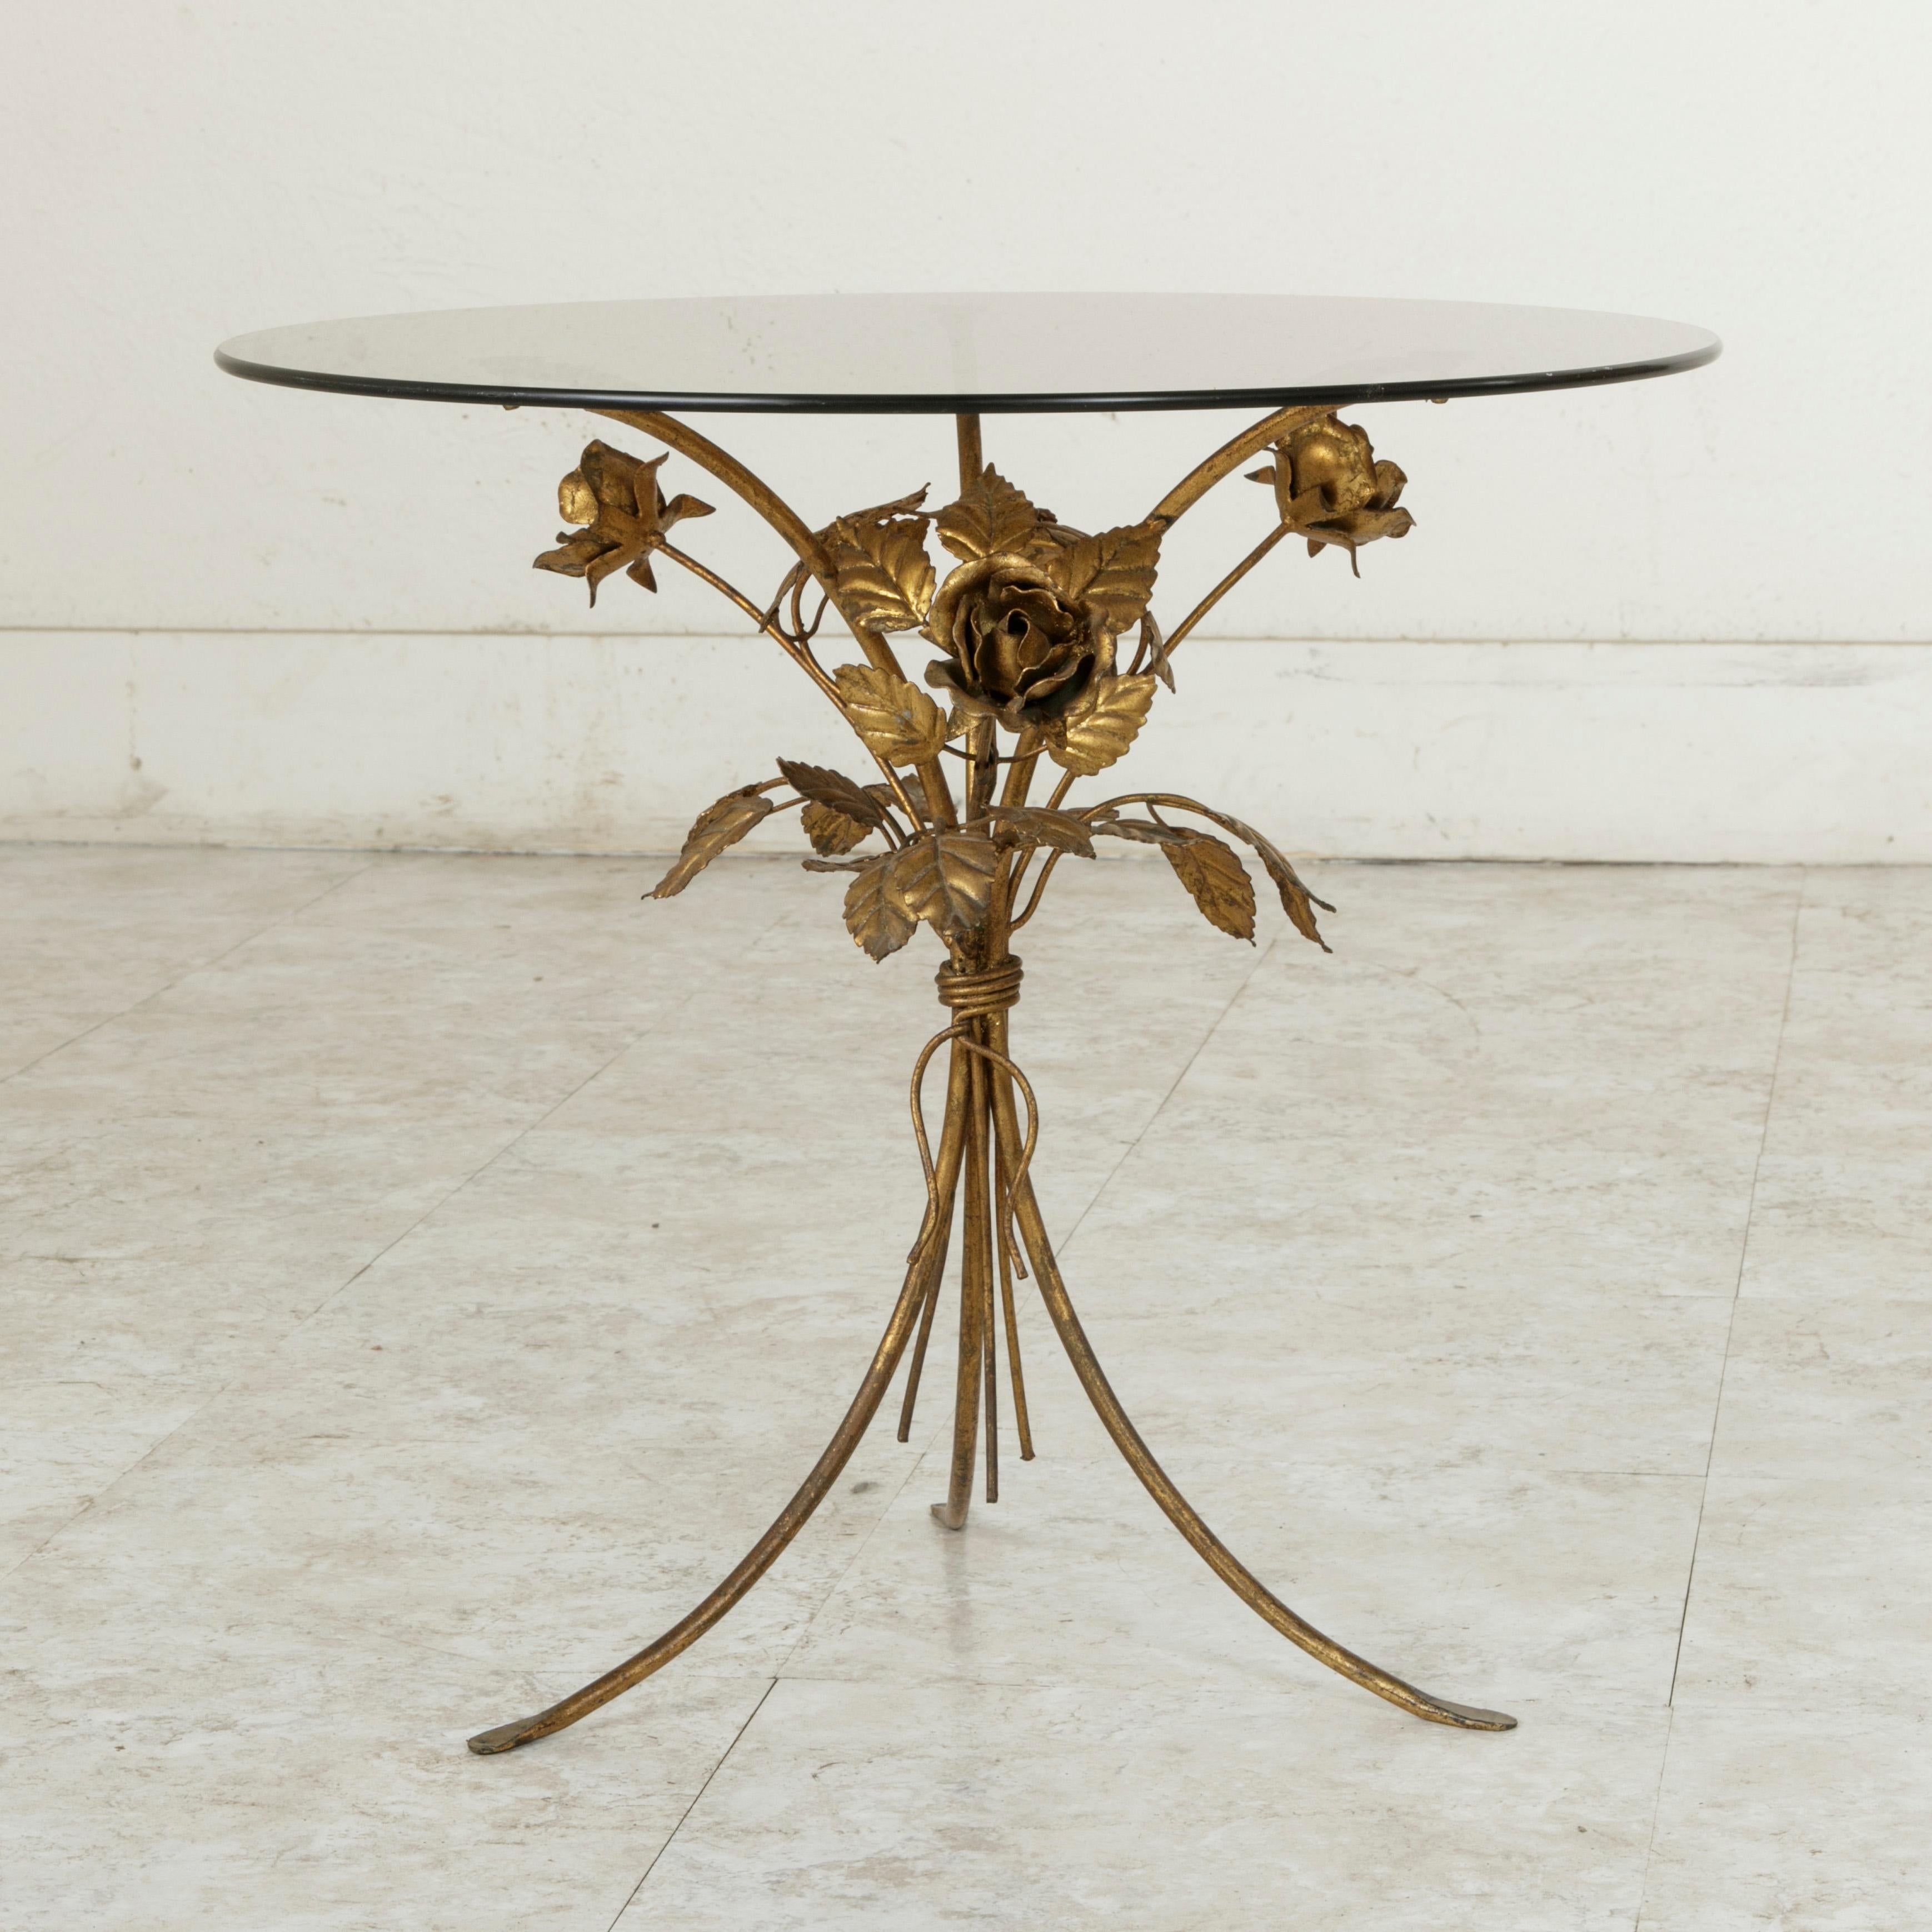 20th Century Midcentury Italian Gilt Metal Side Table with Roses and Smoked Glass Top